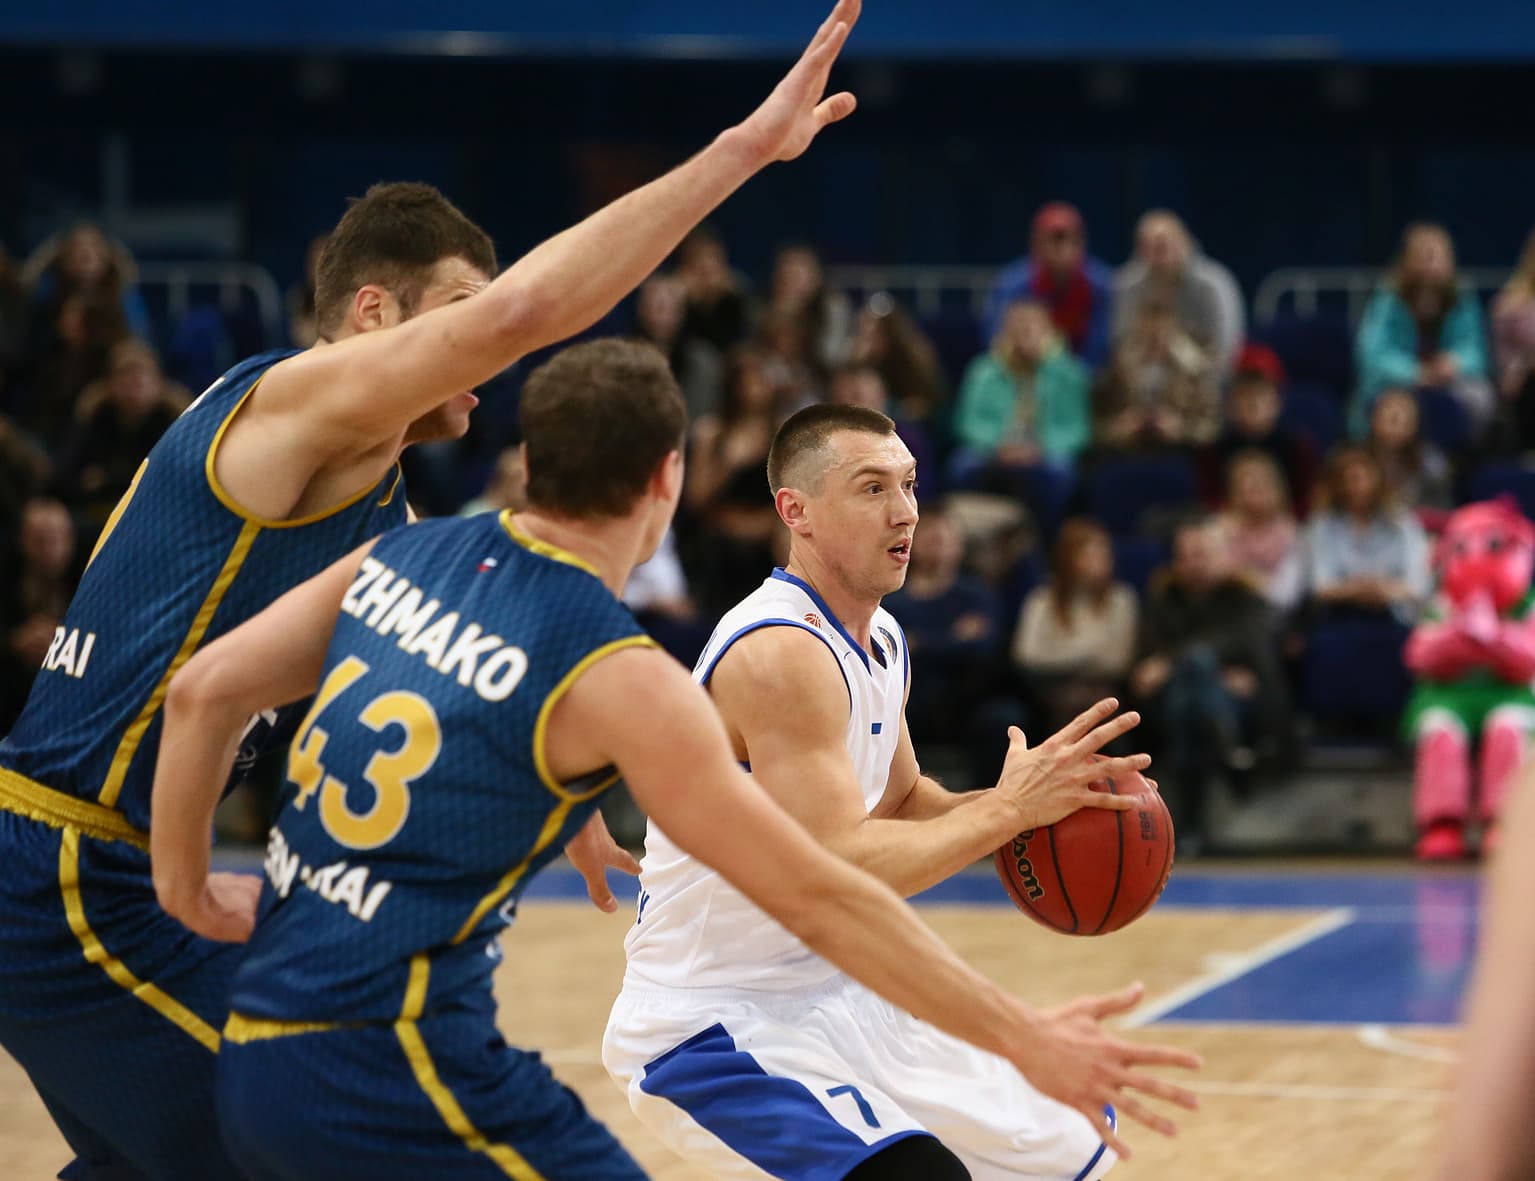 Enisey Stops Parma Rally At The Line